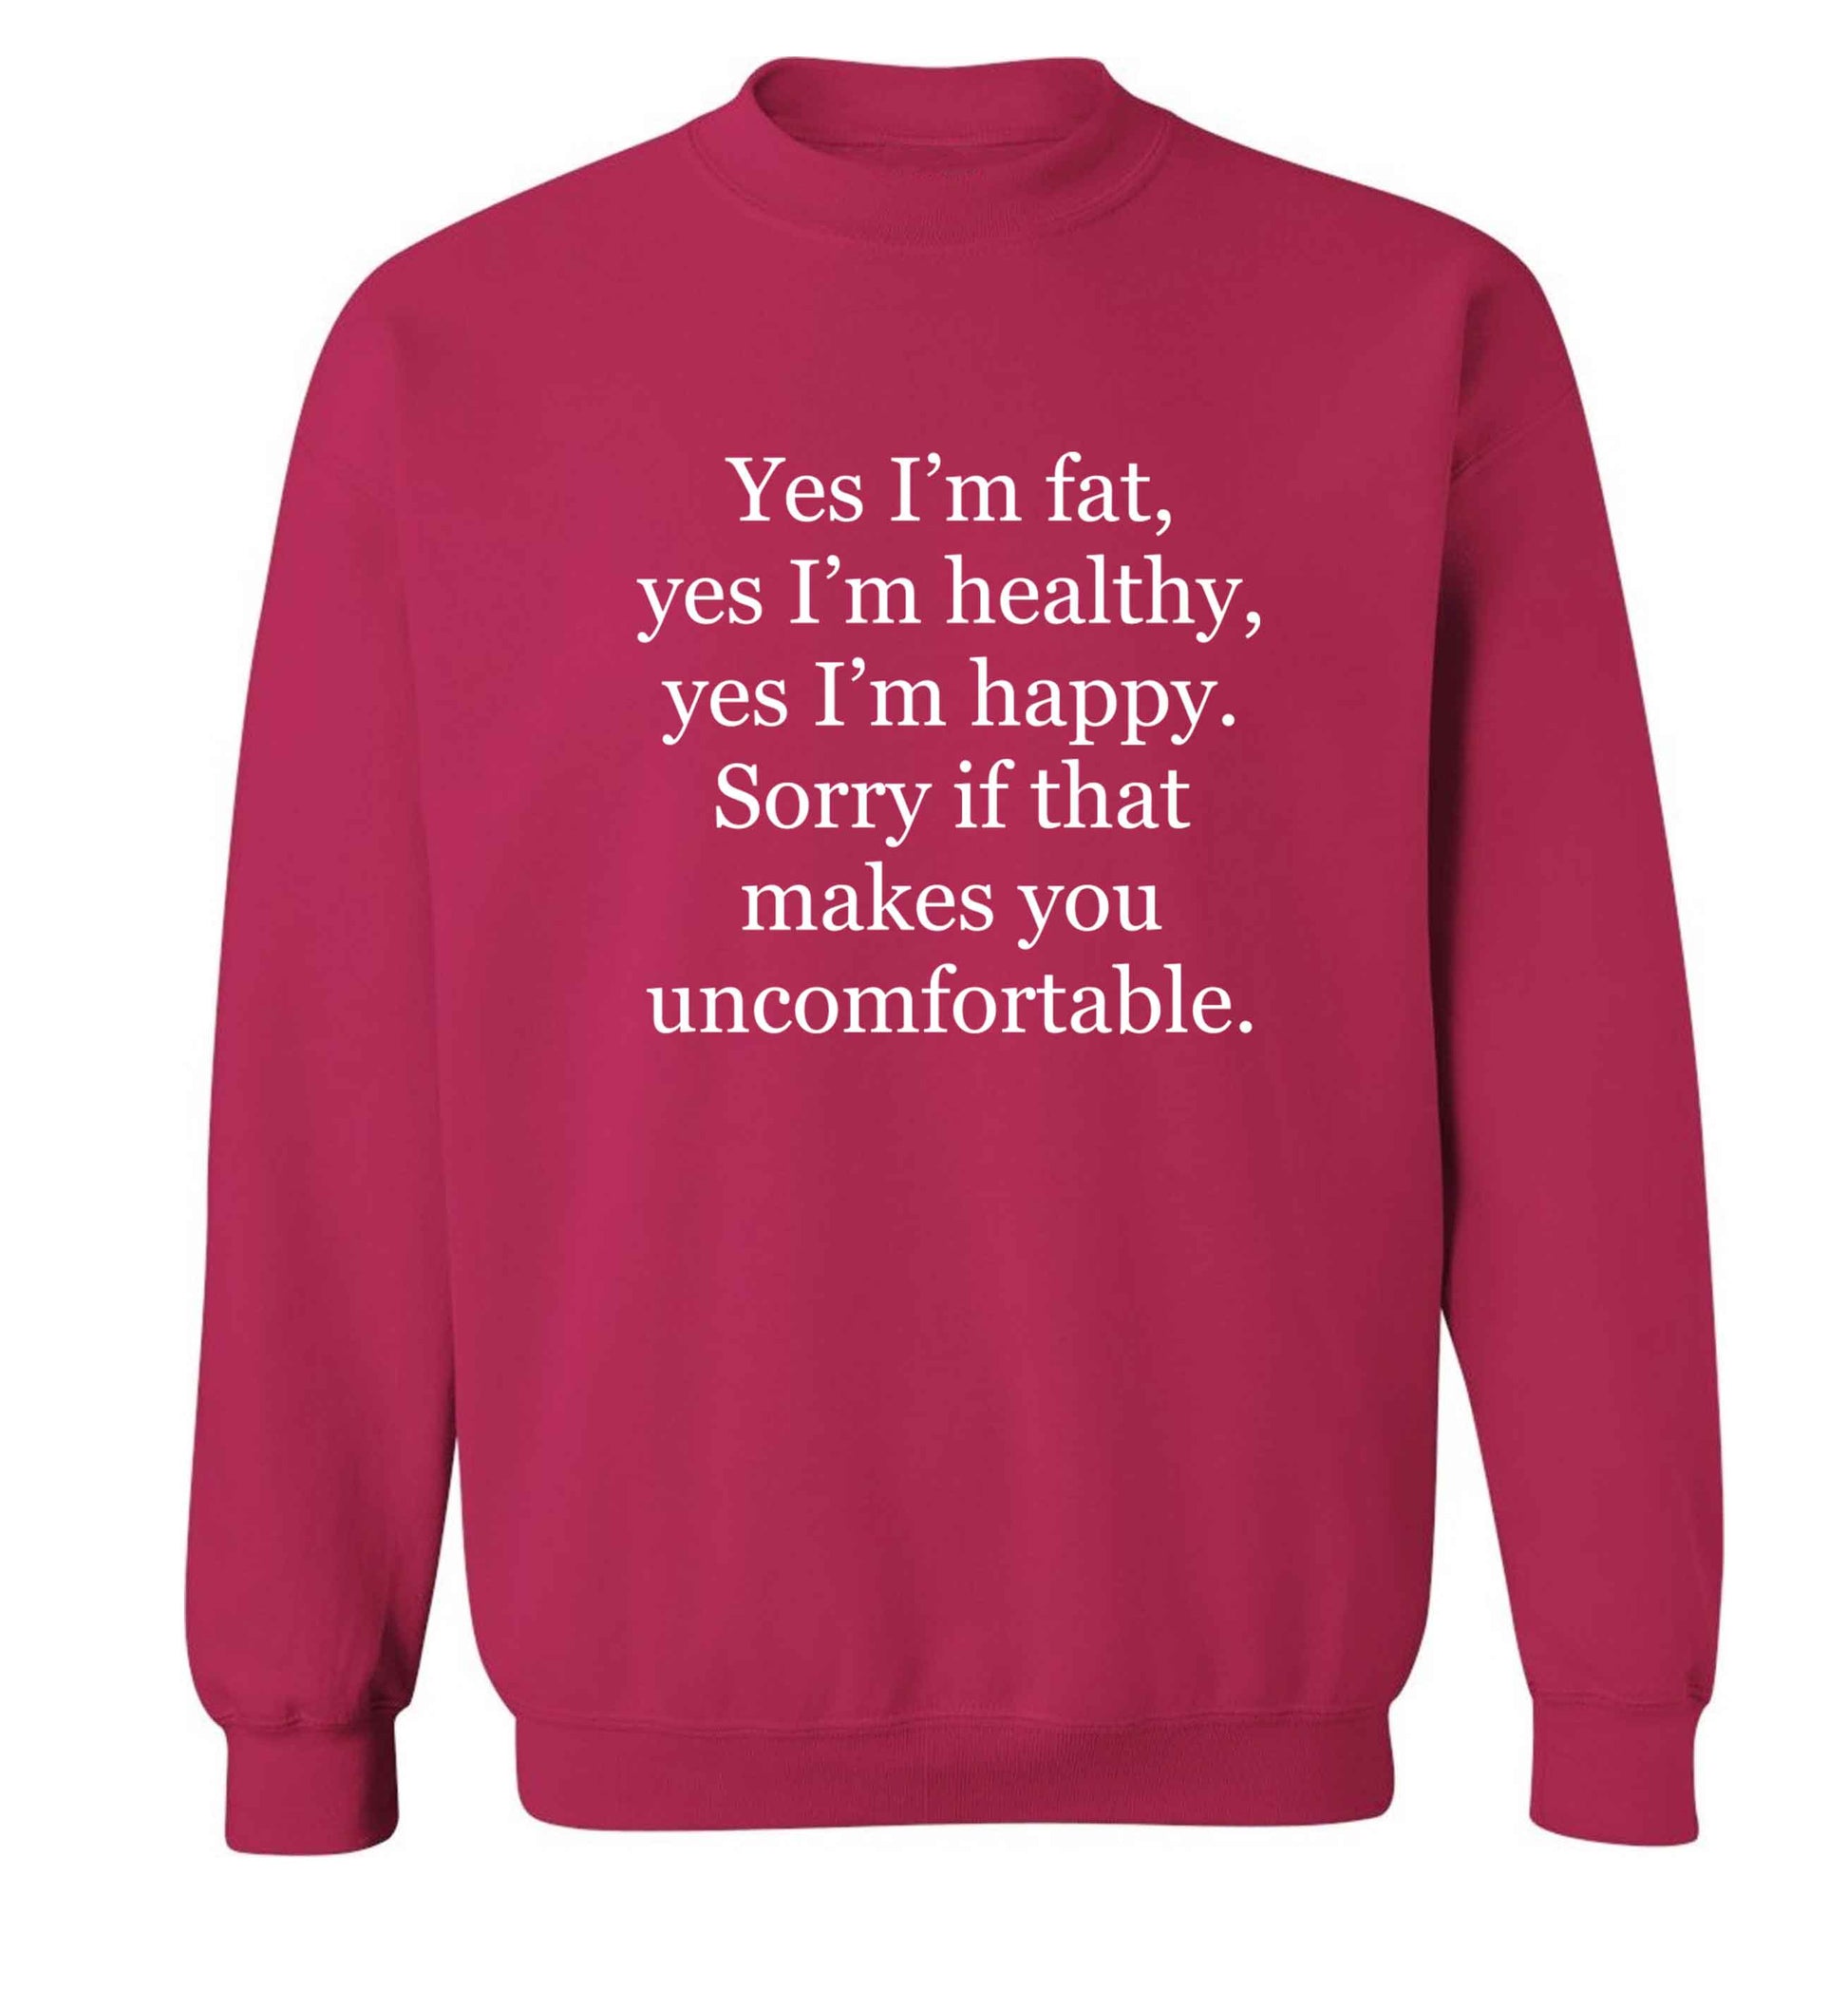 Yes I'm fat, yes I'm healthy, yes I'm happy. Sorry if that makes you uncomfortable adult's unisex pink sweater 2XL